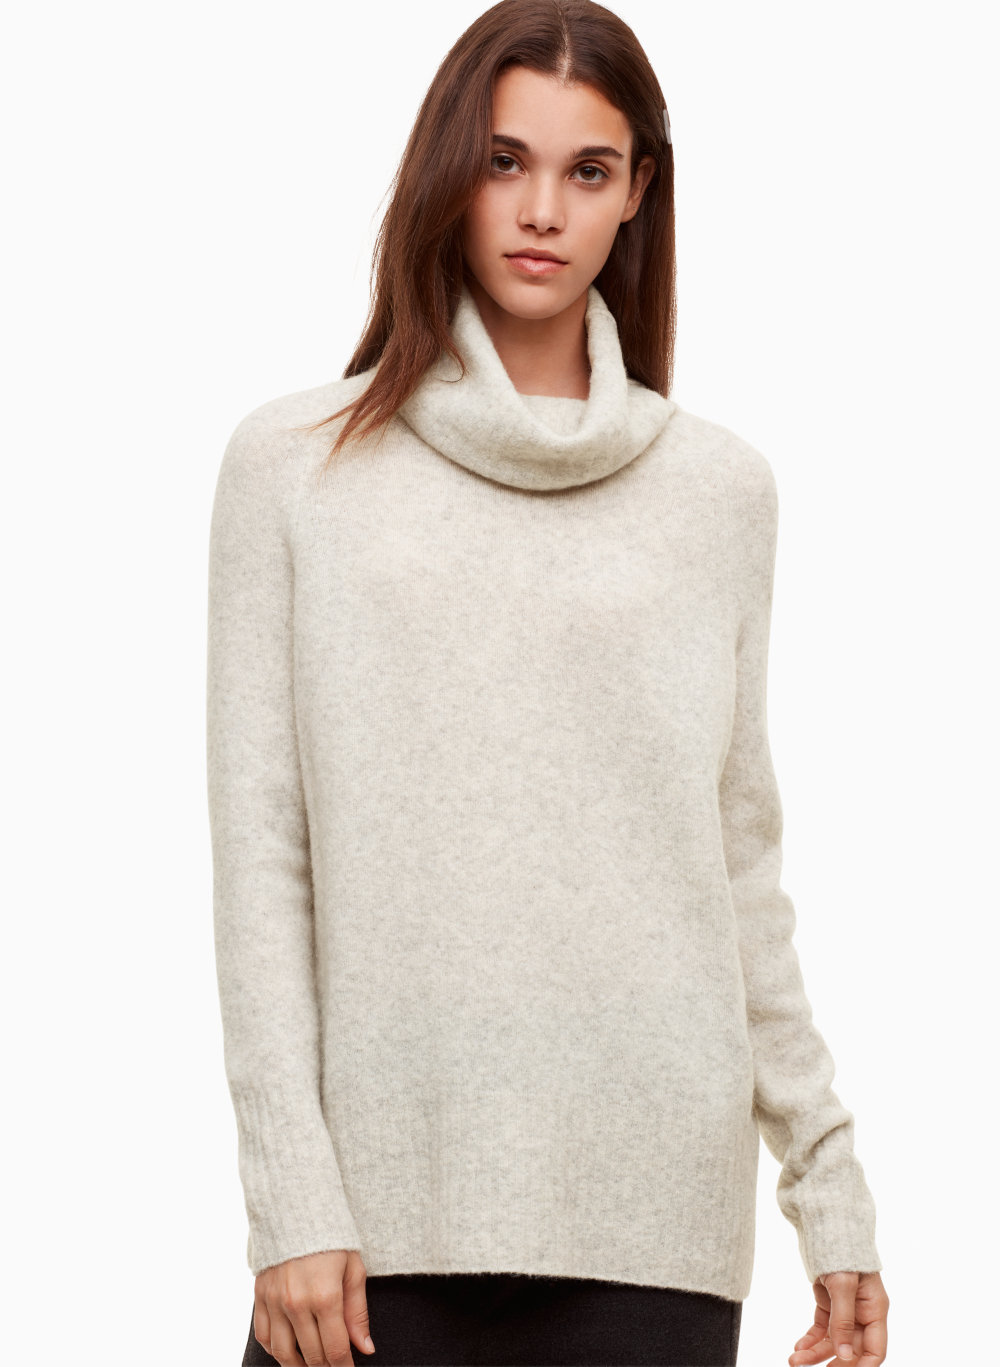 The Group by Babaton PLUTARCH SWEATER | Aritzia